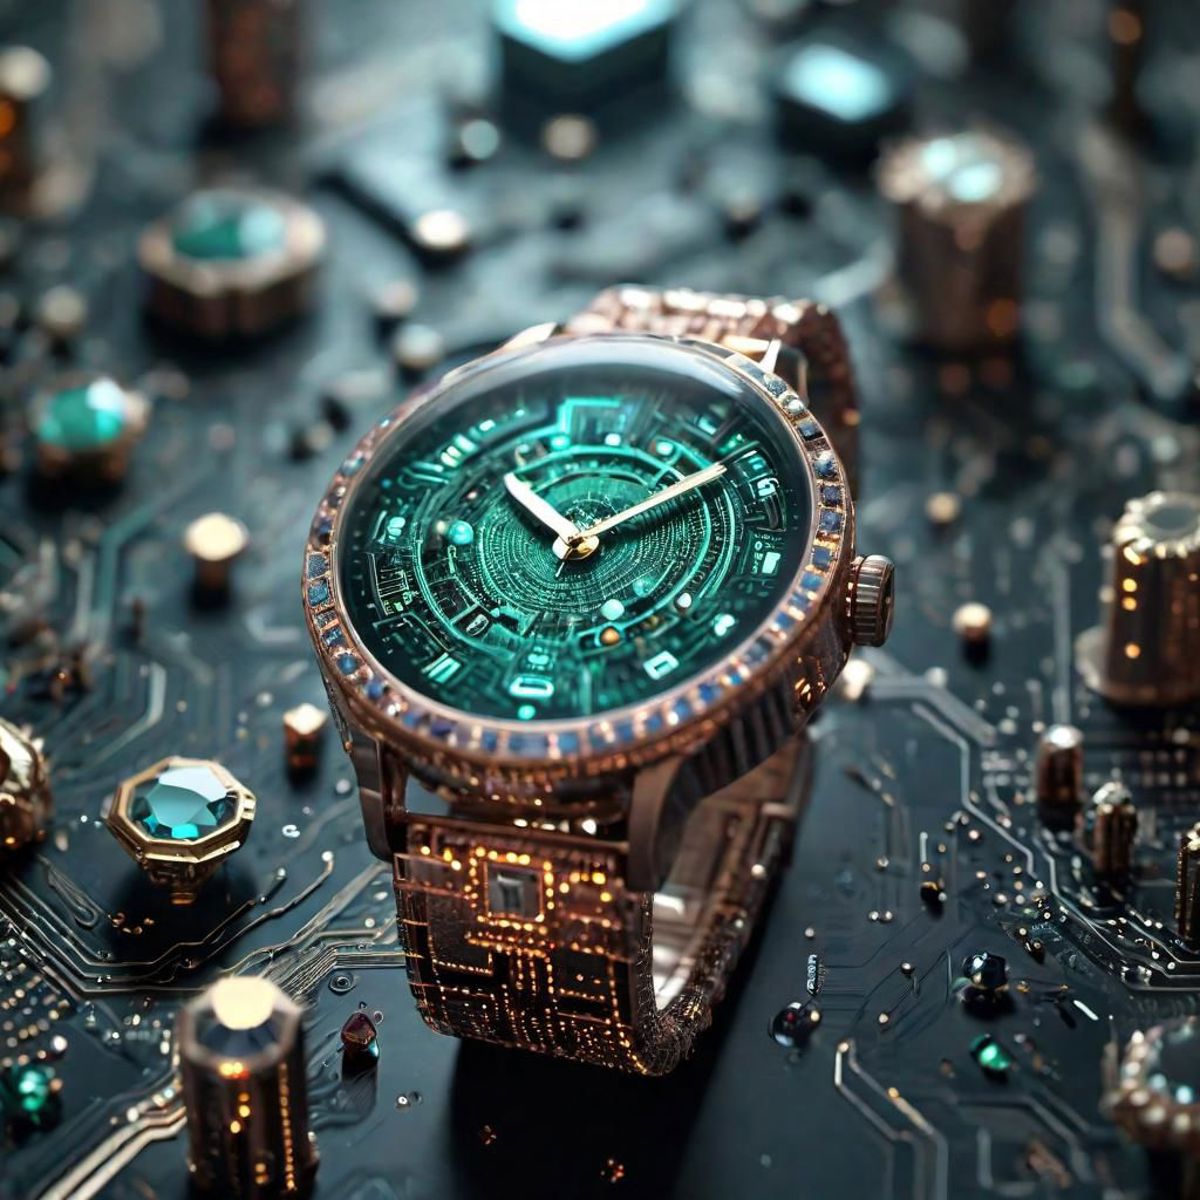 Dark Futuristic Circuit Boards image by Spizzy